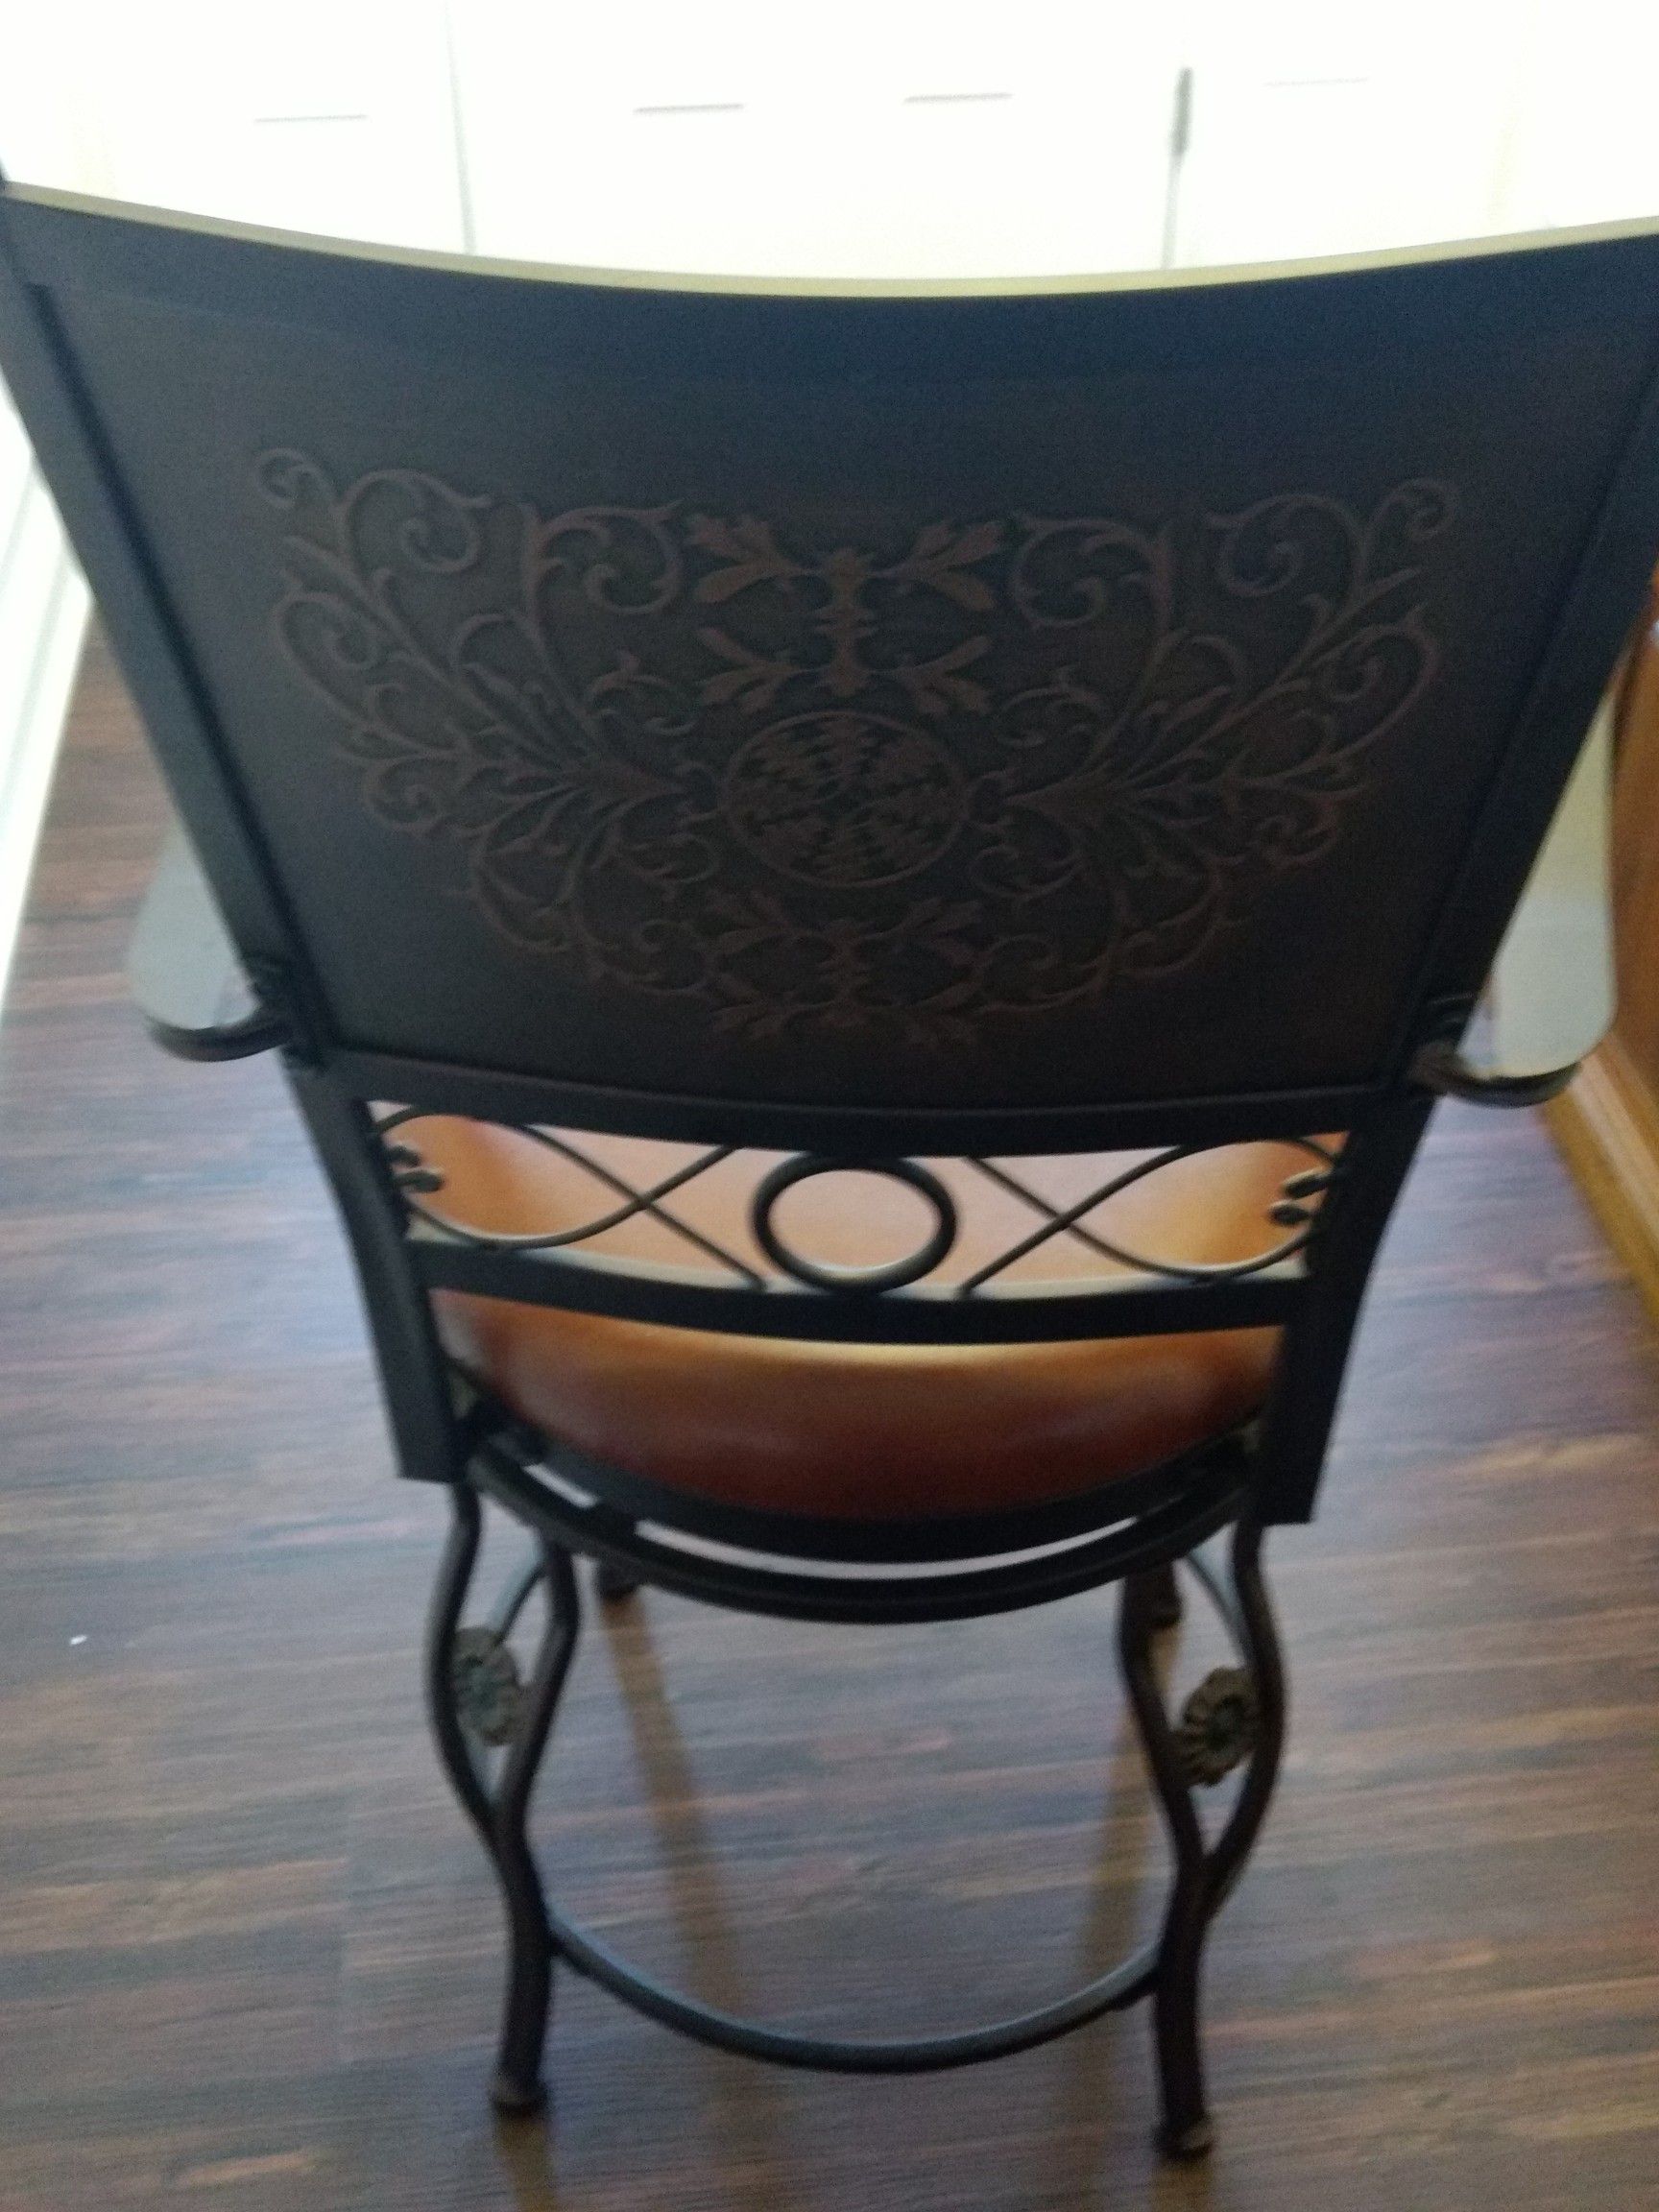 Brown leather bar stools/pub table chairs